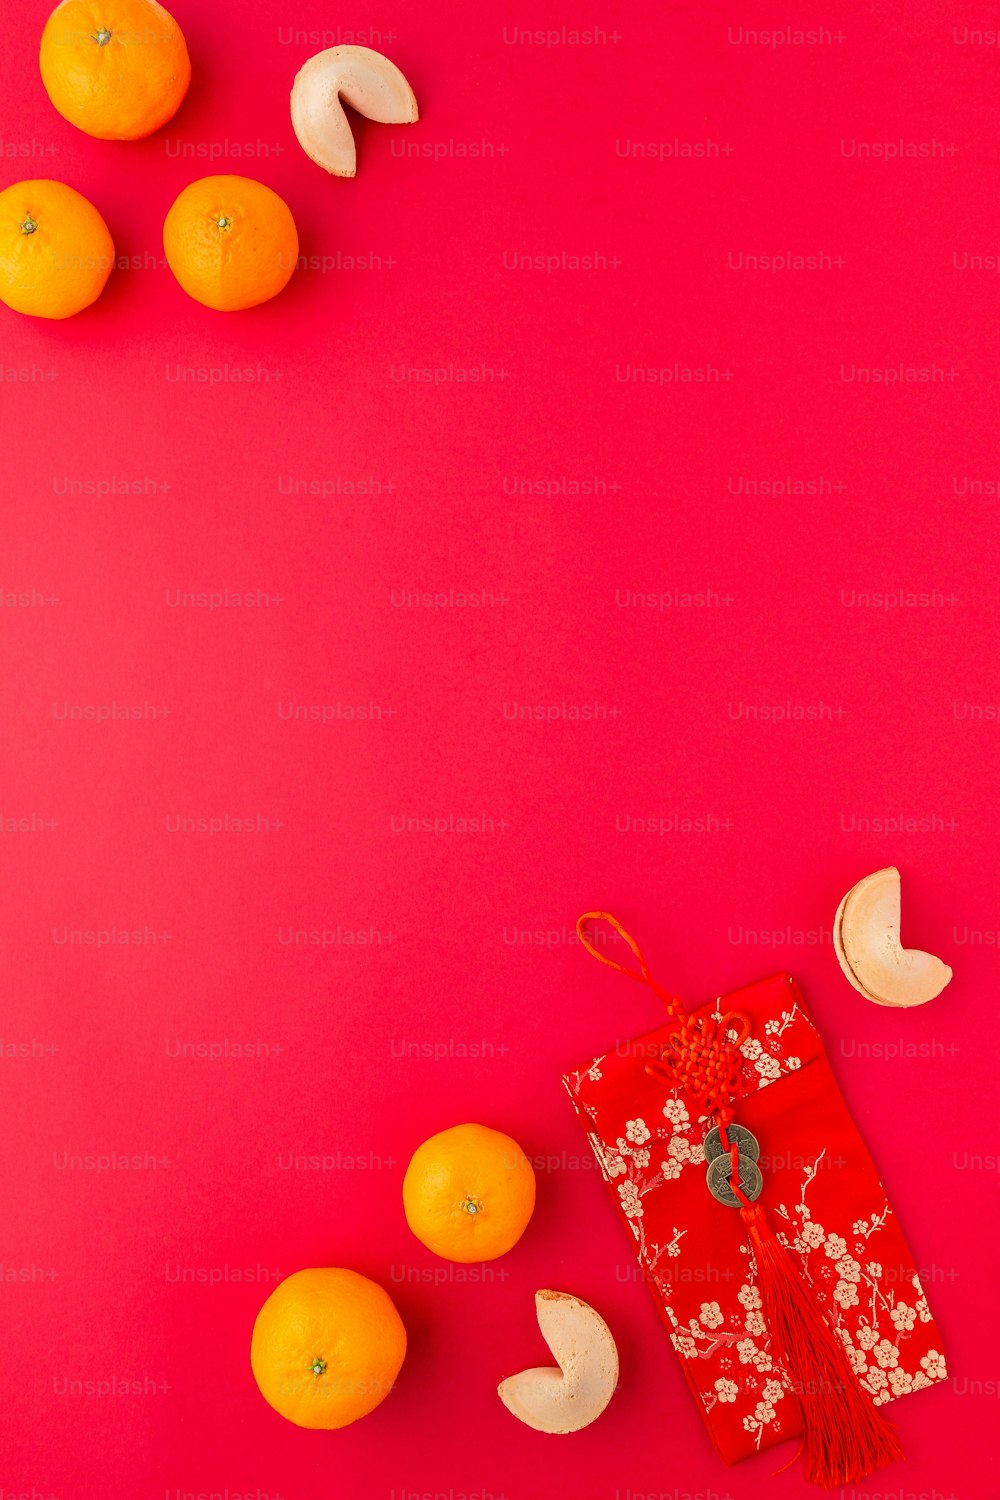 oranges, bananas, and an orange on a pink background